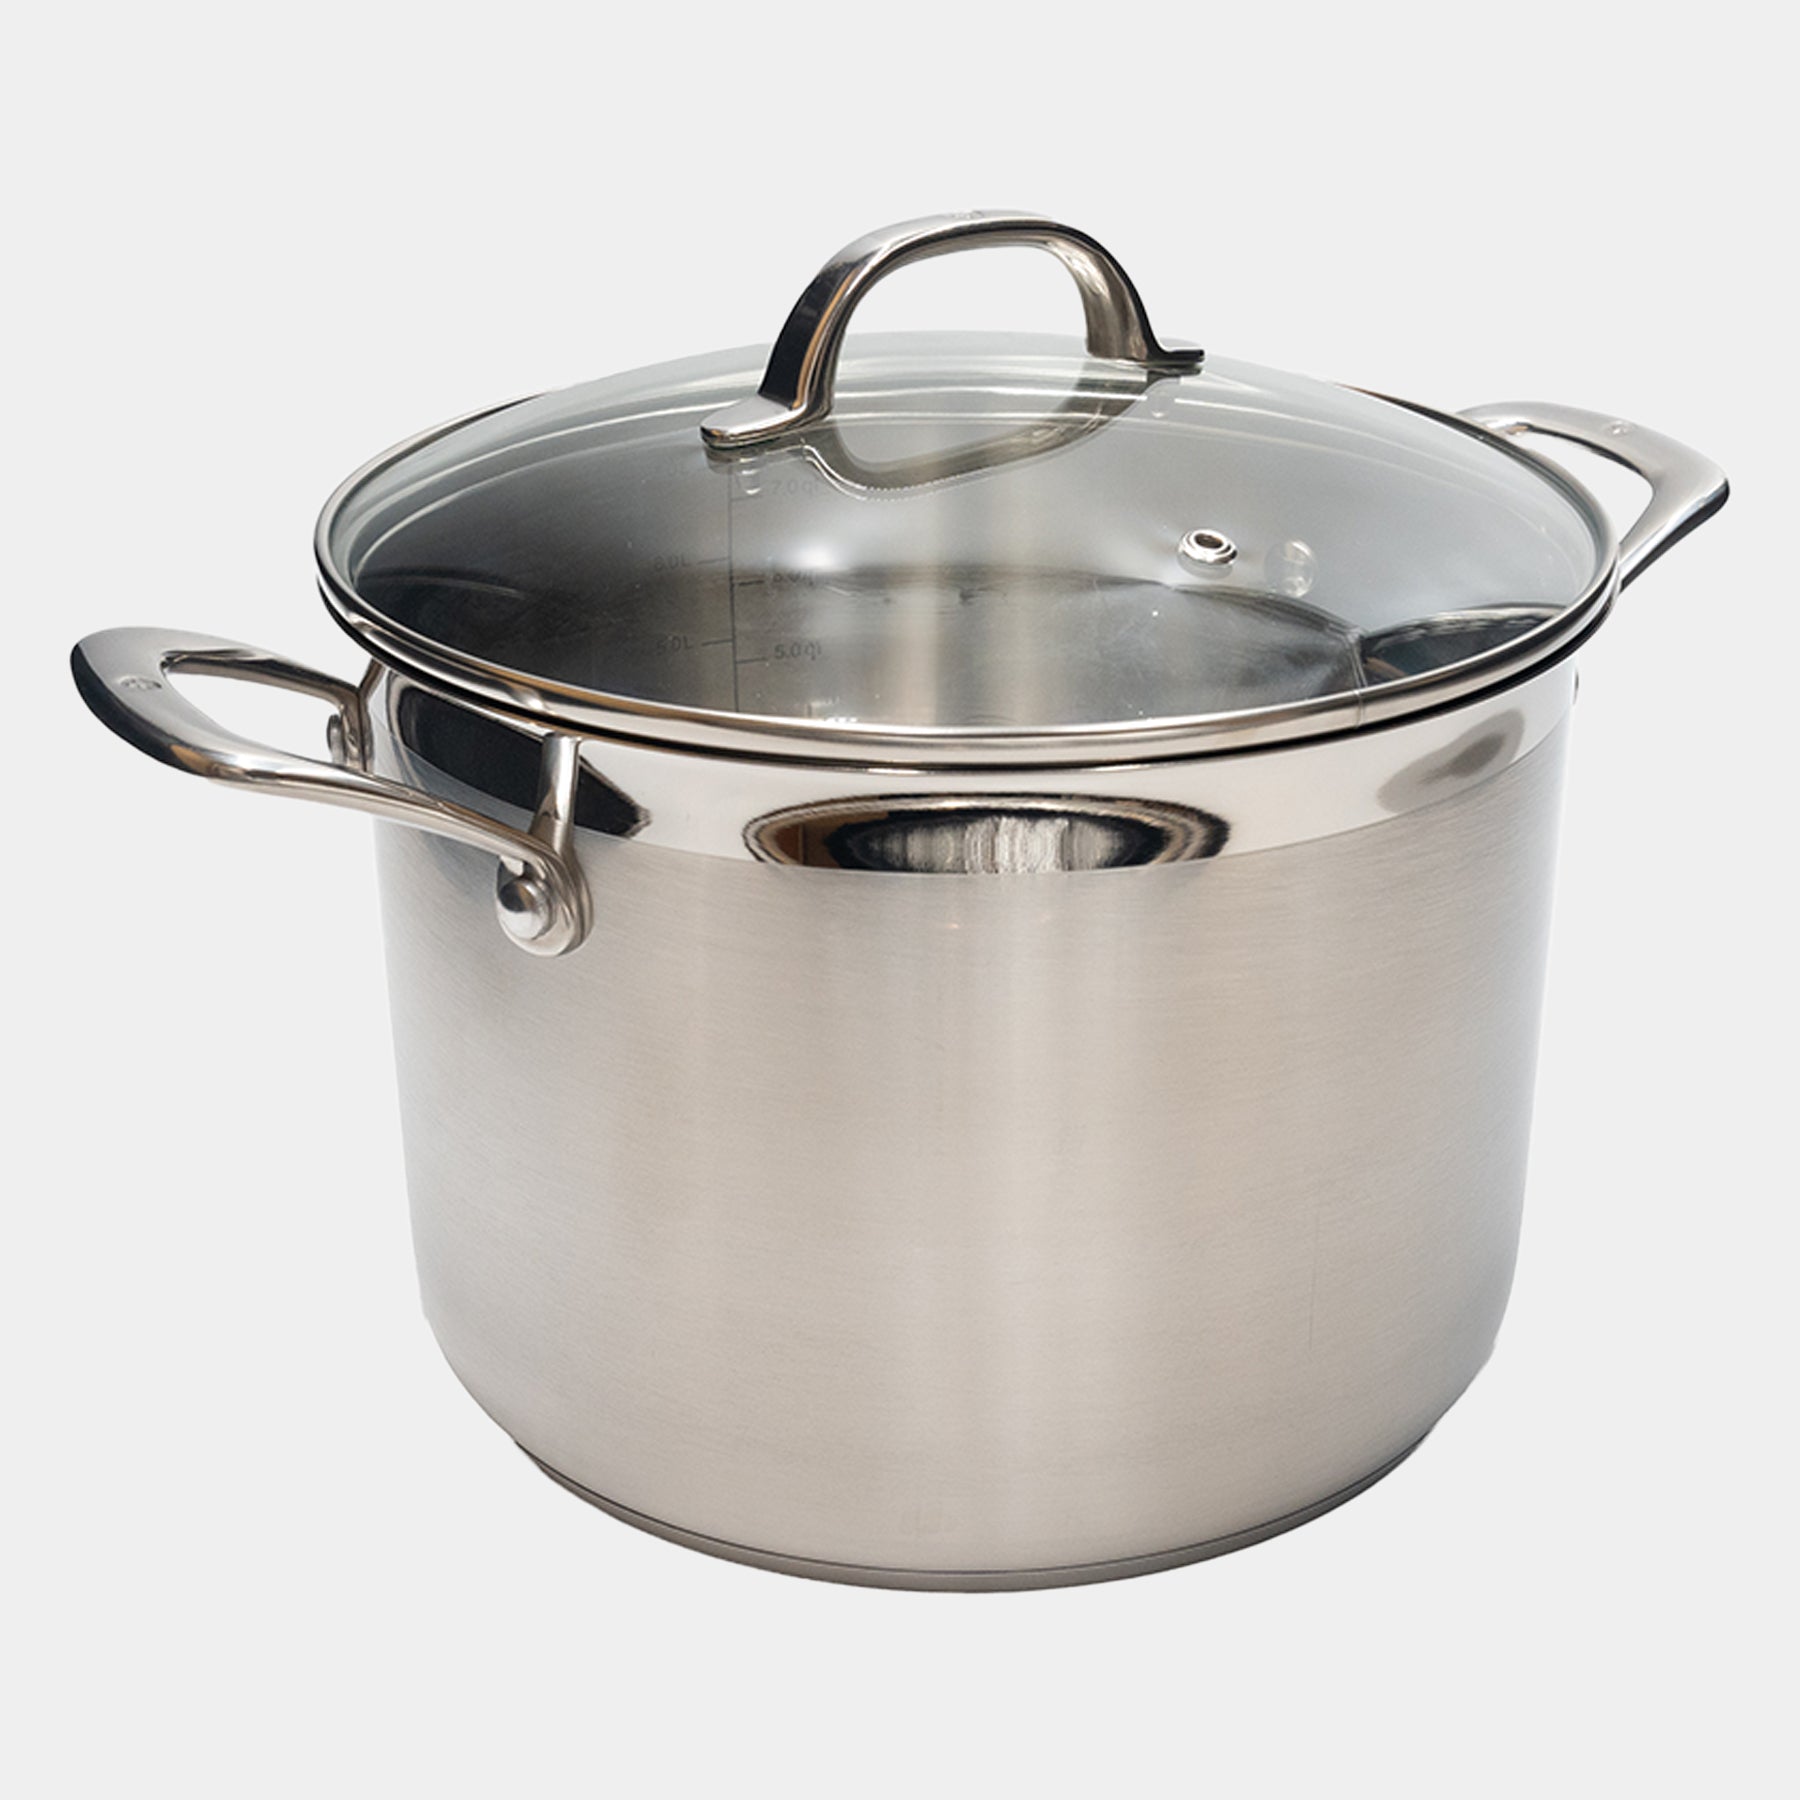 Premium Steel 7.6 qt Stainless Stock Pot with Glass Lid - Induction